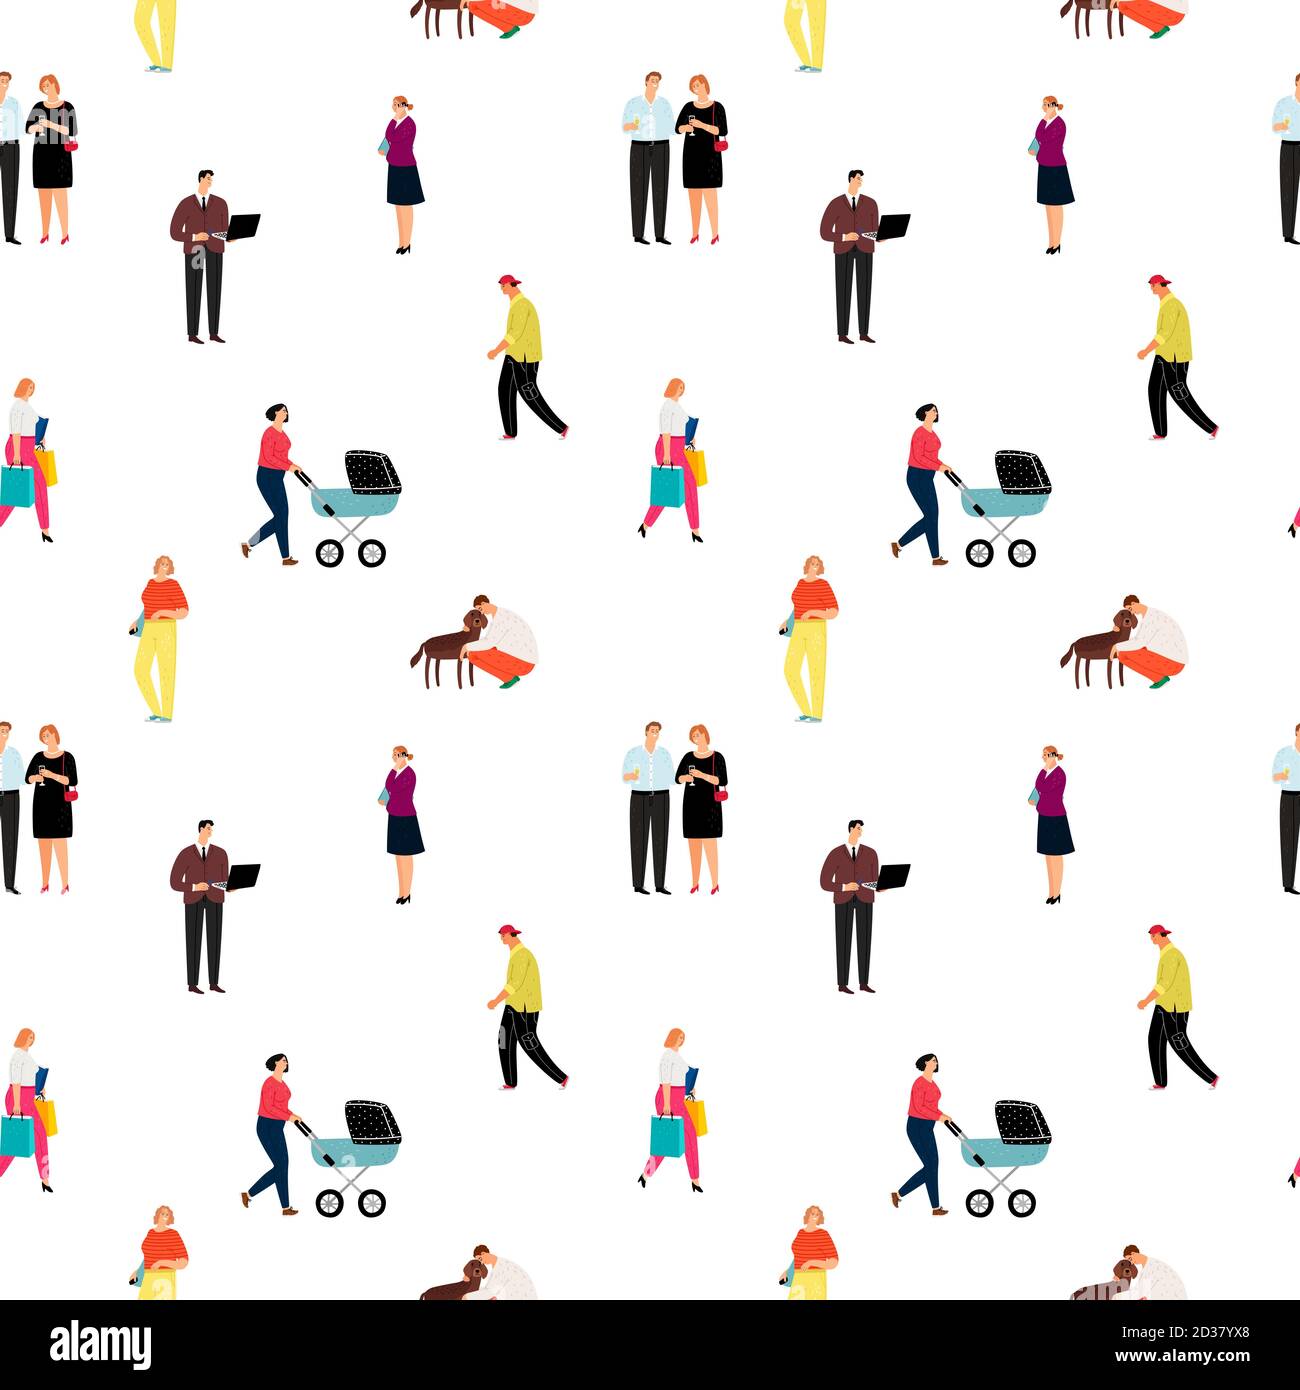 Vector Creative Character Design Posing While Photographer Taking Photos  Stock Illustration - Download Image Now - iStock